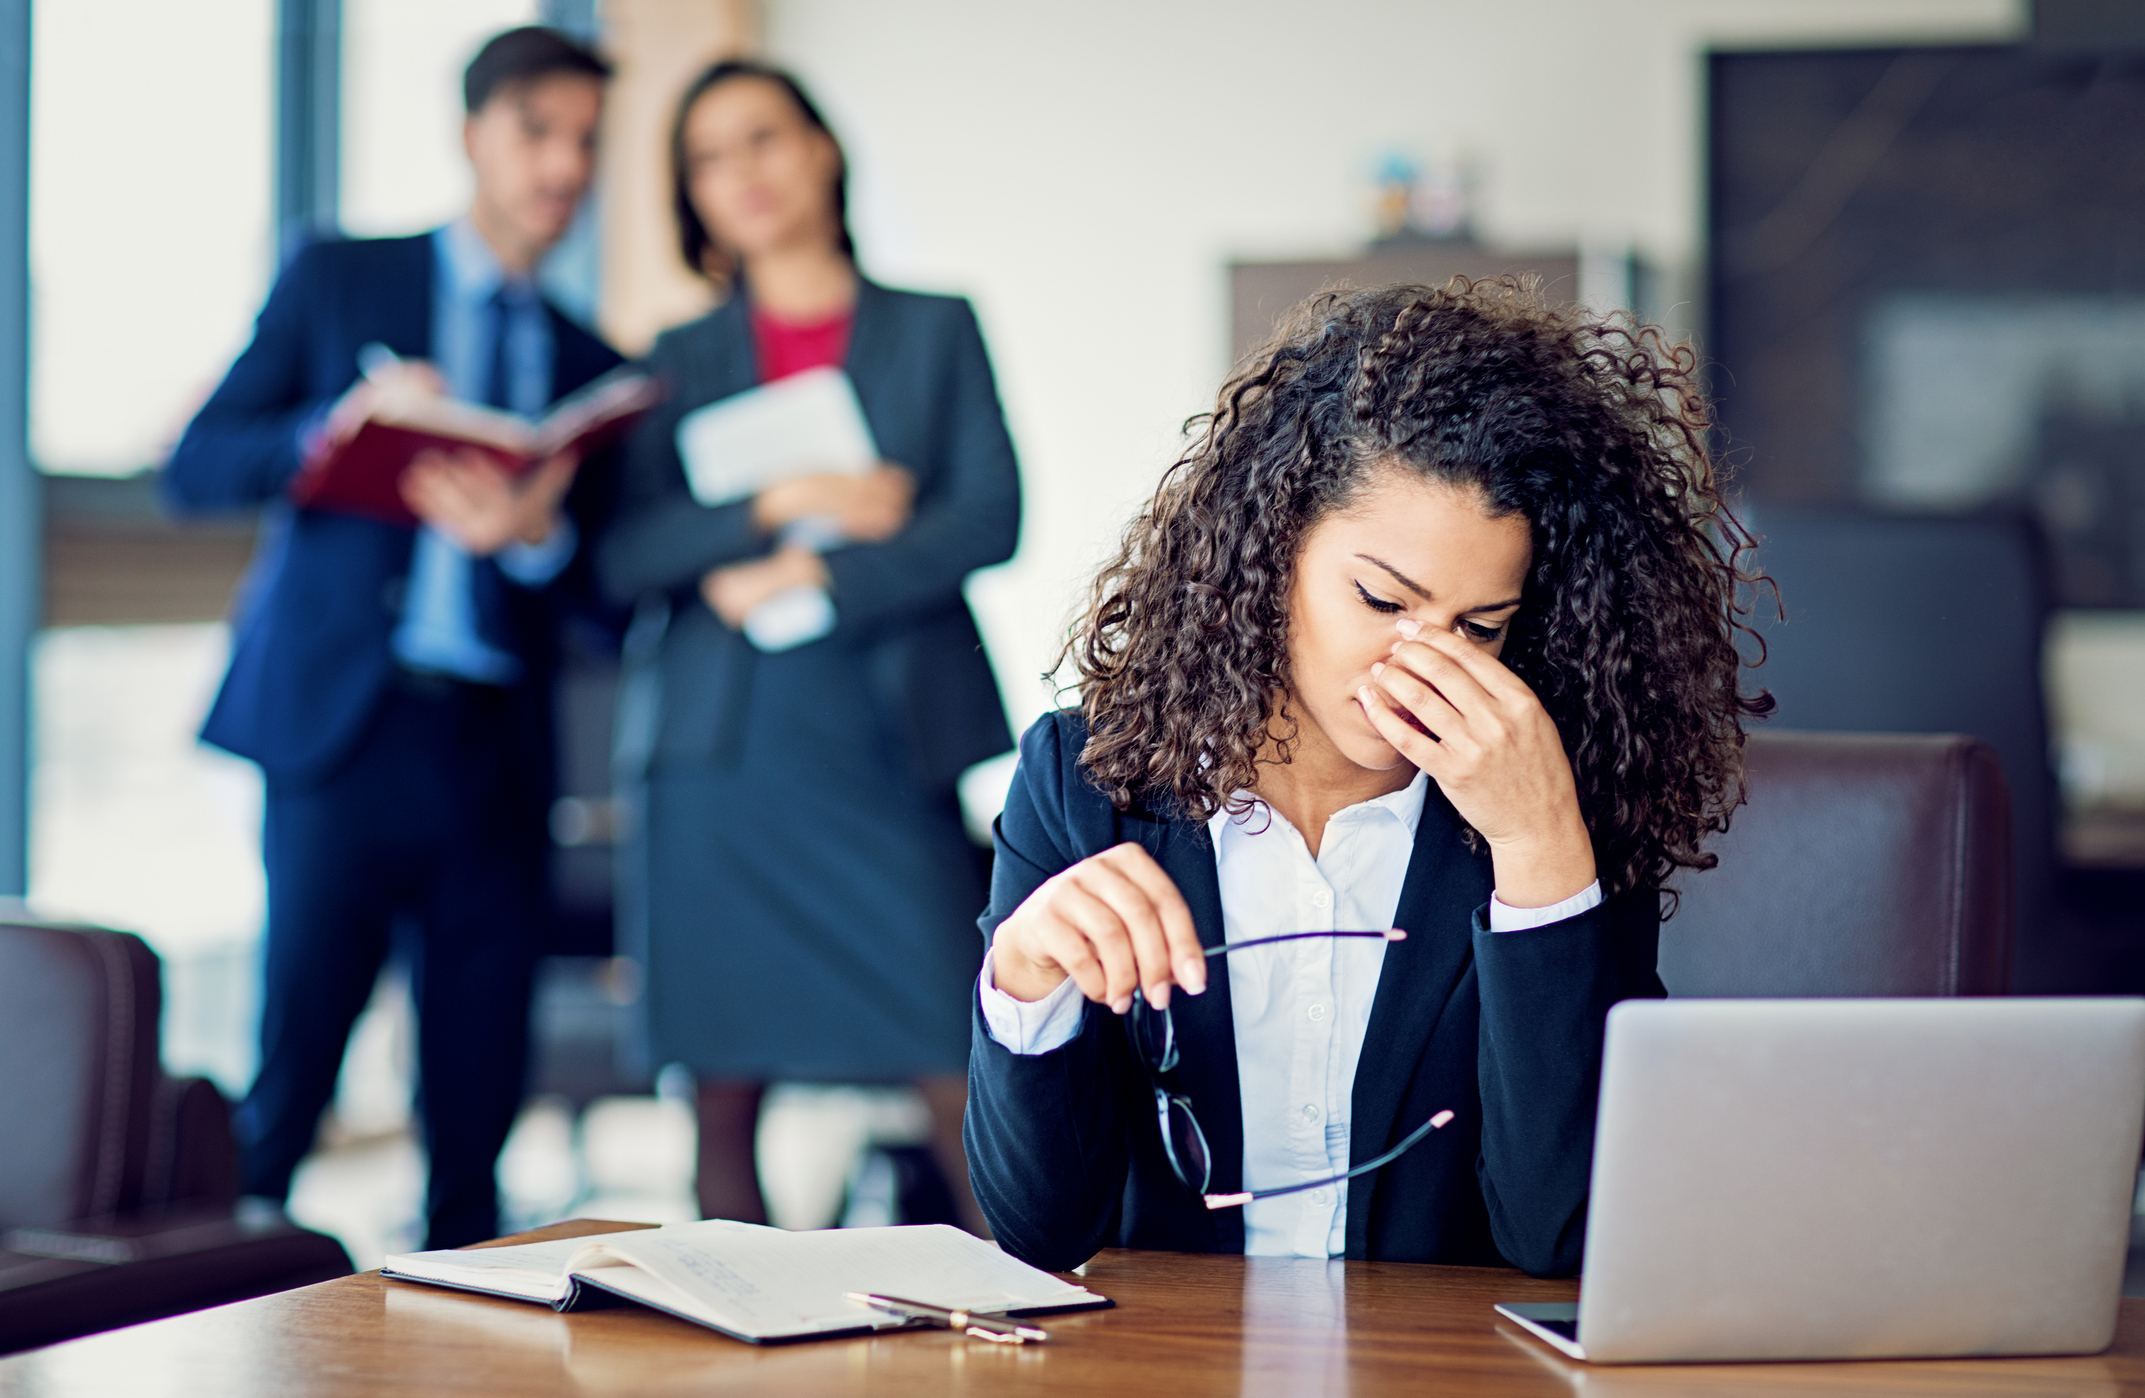 International Bar Association Survey Data Exposes Bullying and Harassment in Legal Profession